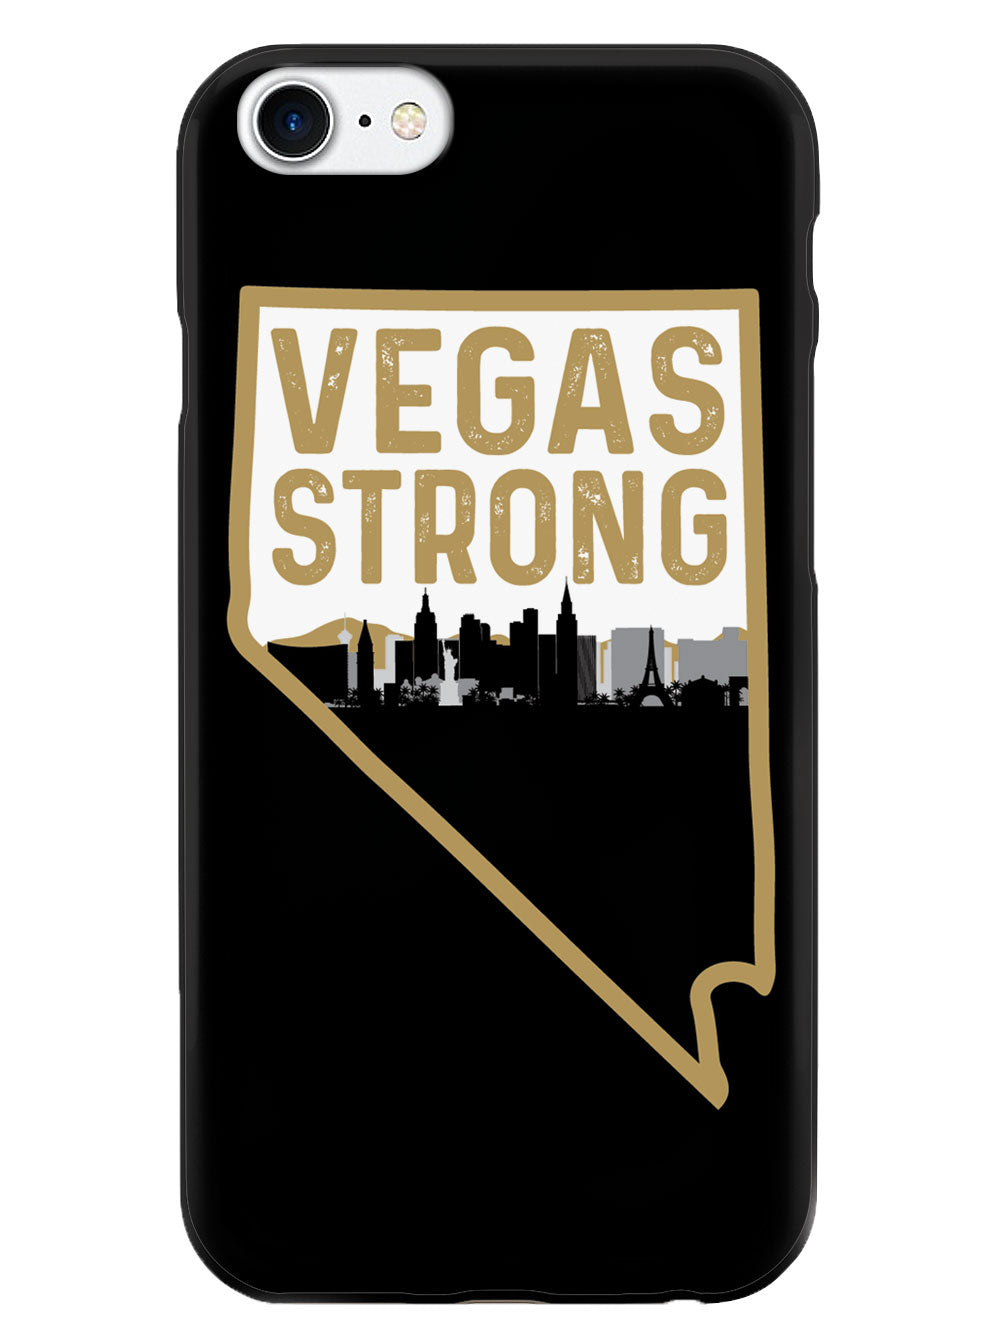 Vegas Strong - Nevada and City Silhouette - Black Case